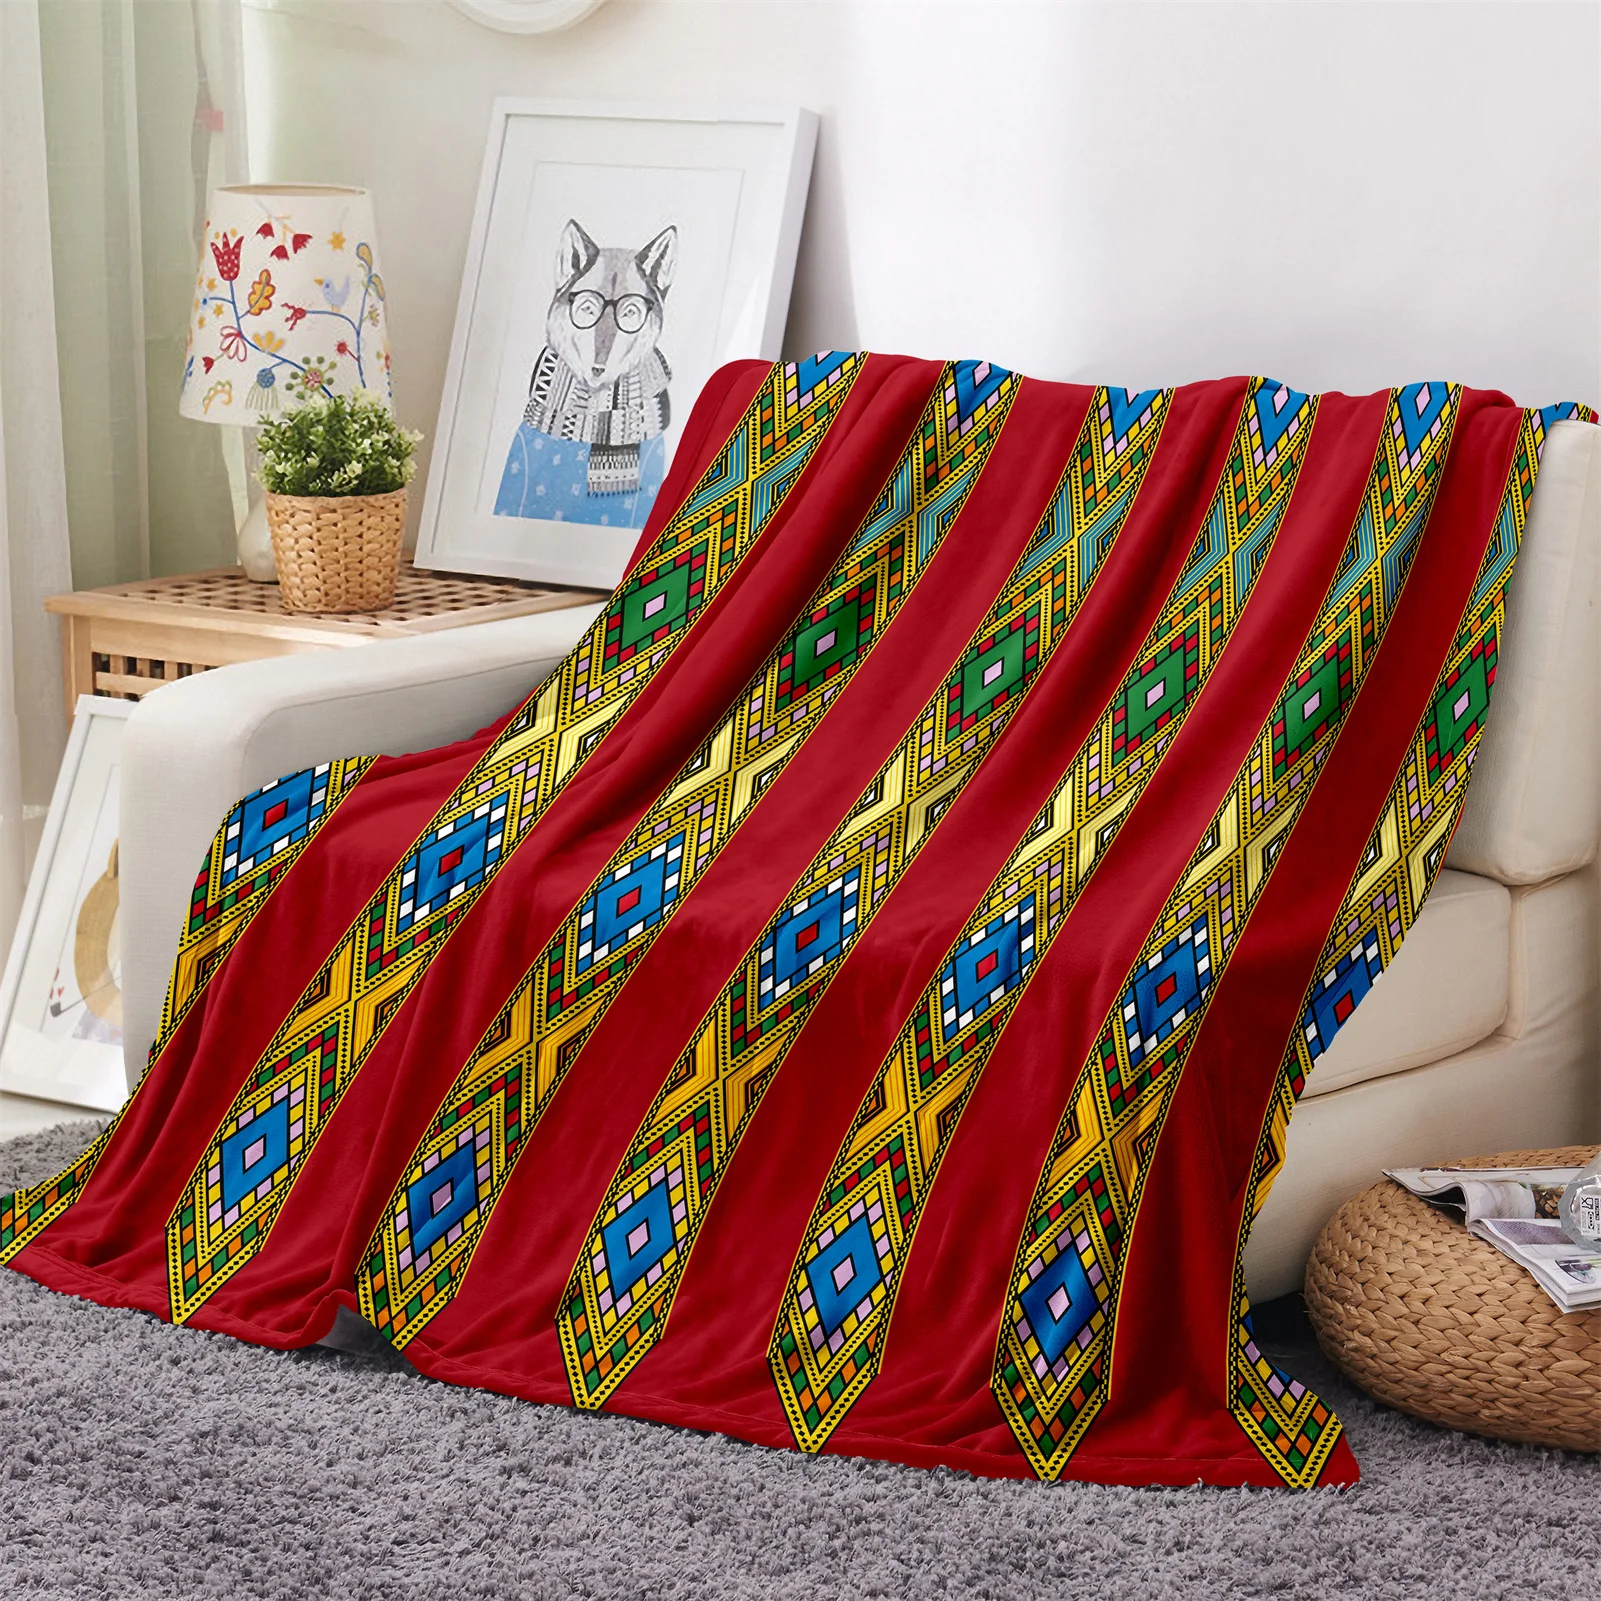 

Africa Ethiopian style of the Red and Gold Nation Luxury Soft Warm Polyester Throw Flannel Blanket for Couch Bed Travel Cover